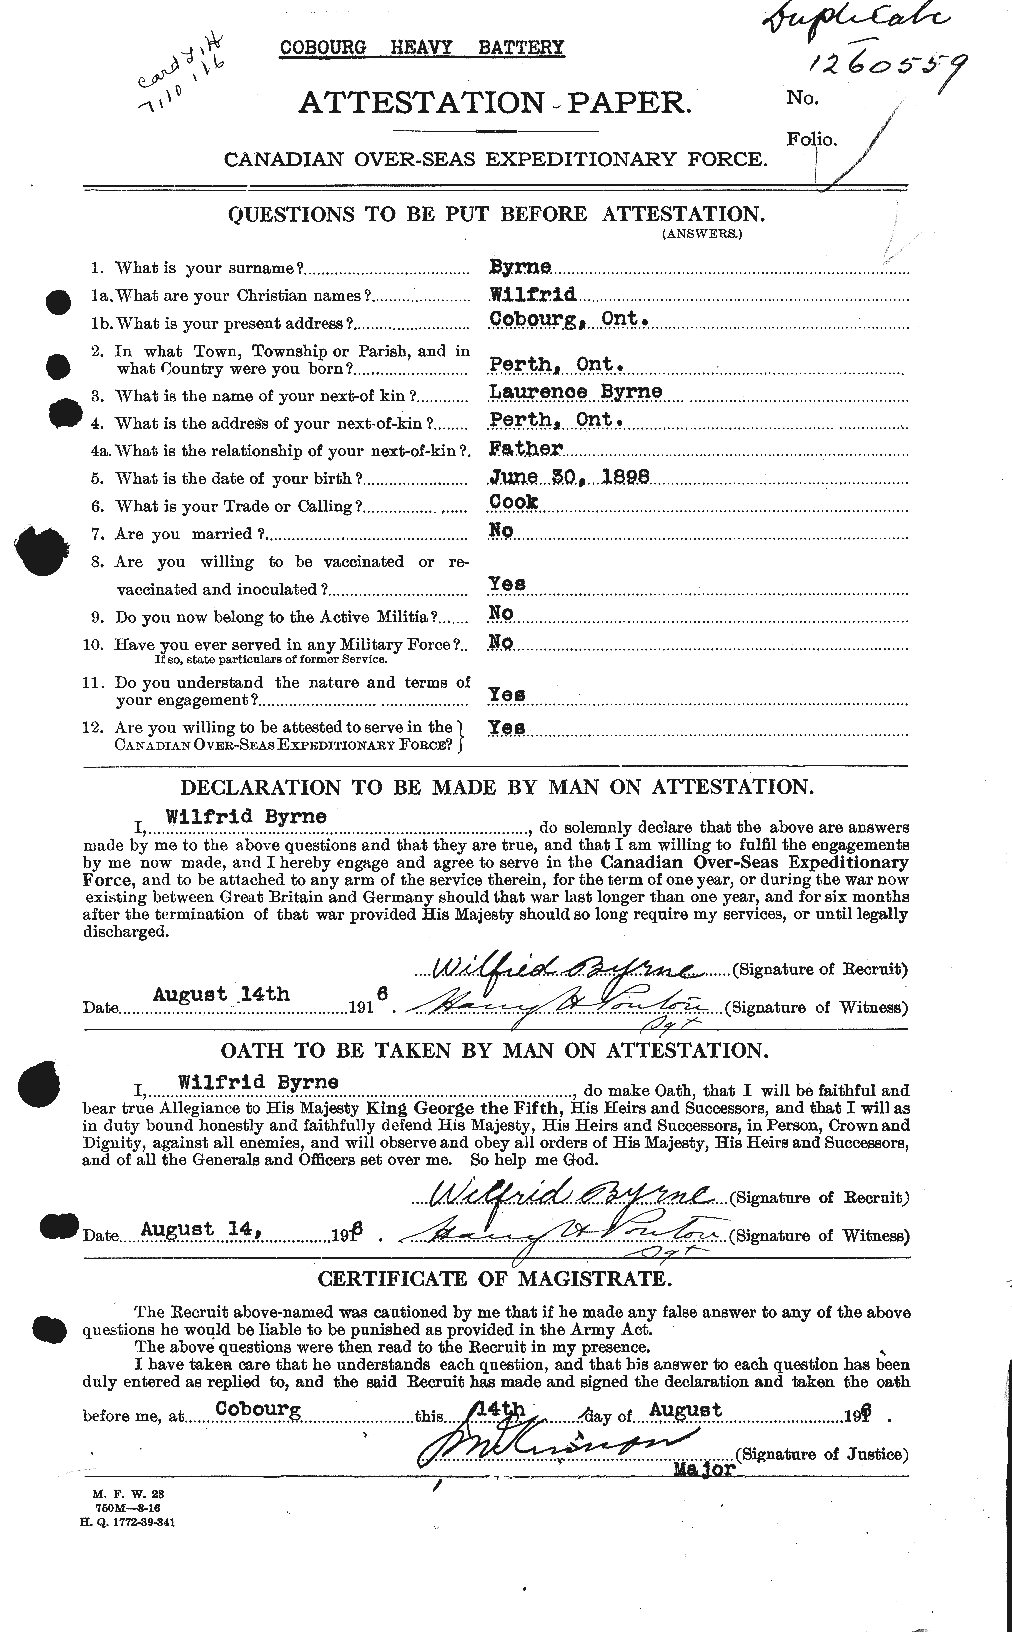 Personnel Records of the First World War - CEF 277169a